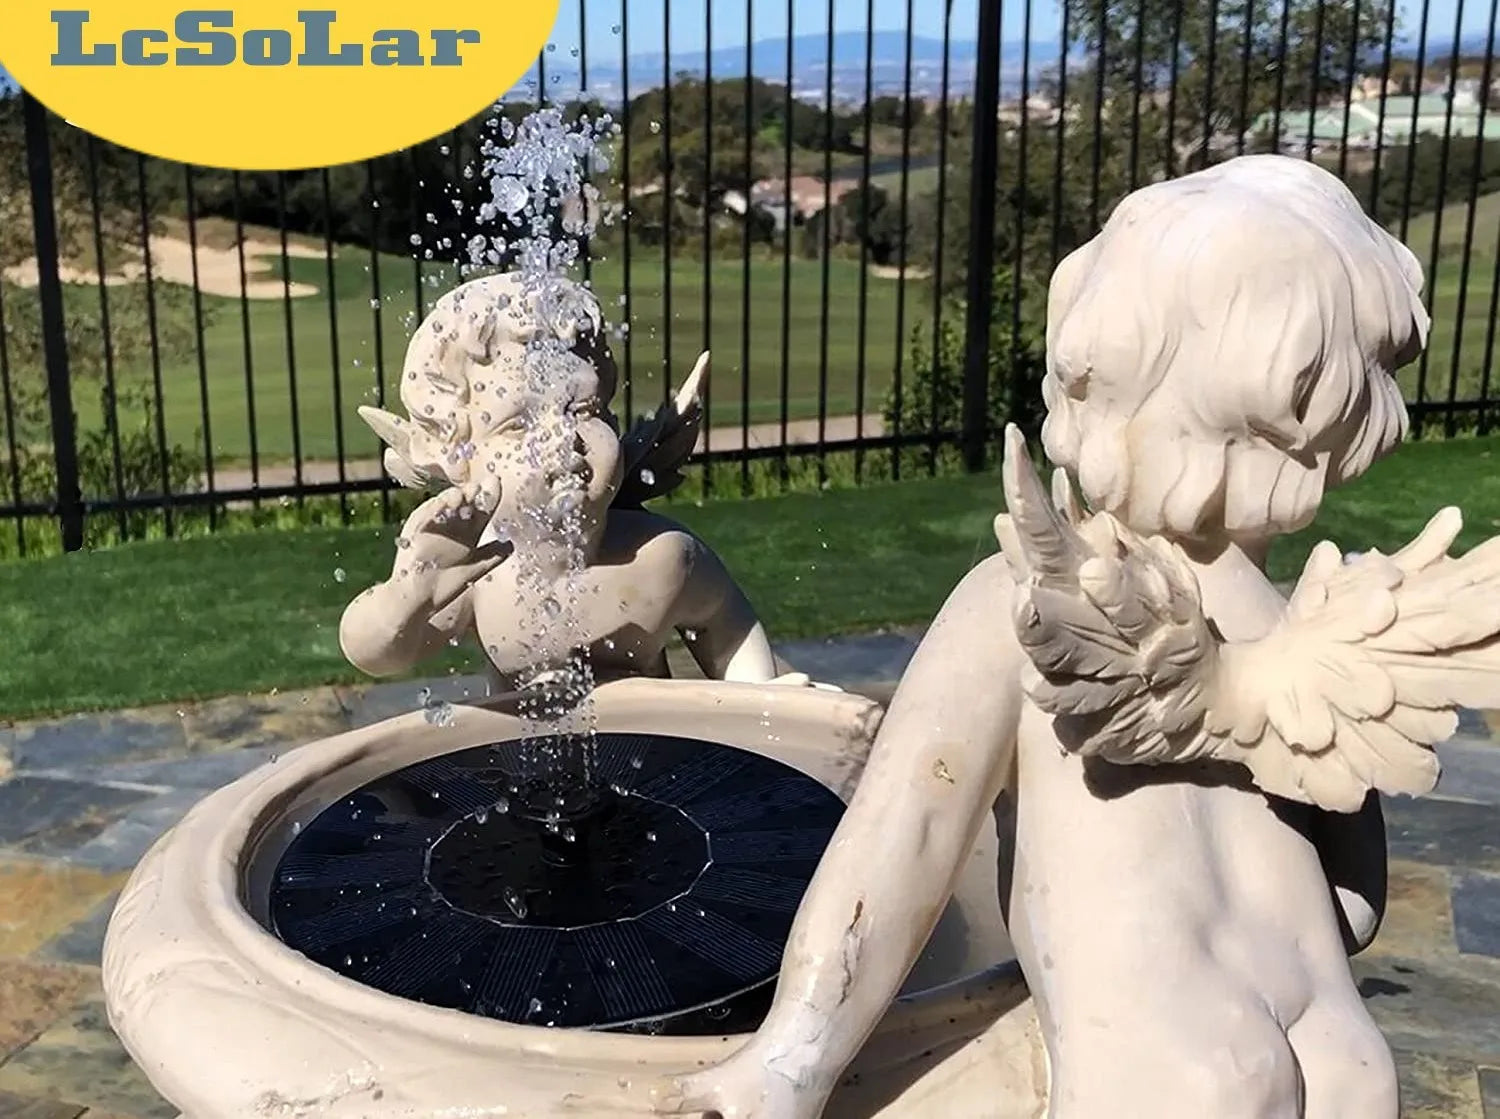 Floating Solar Fountain, Optimal performance: sunny day, at least 75°F, filled bird bath with pump underwater.